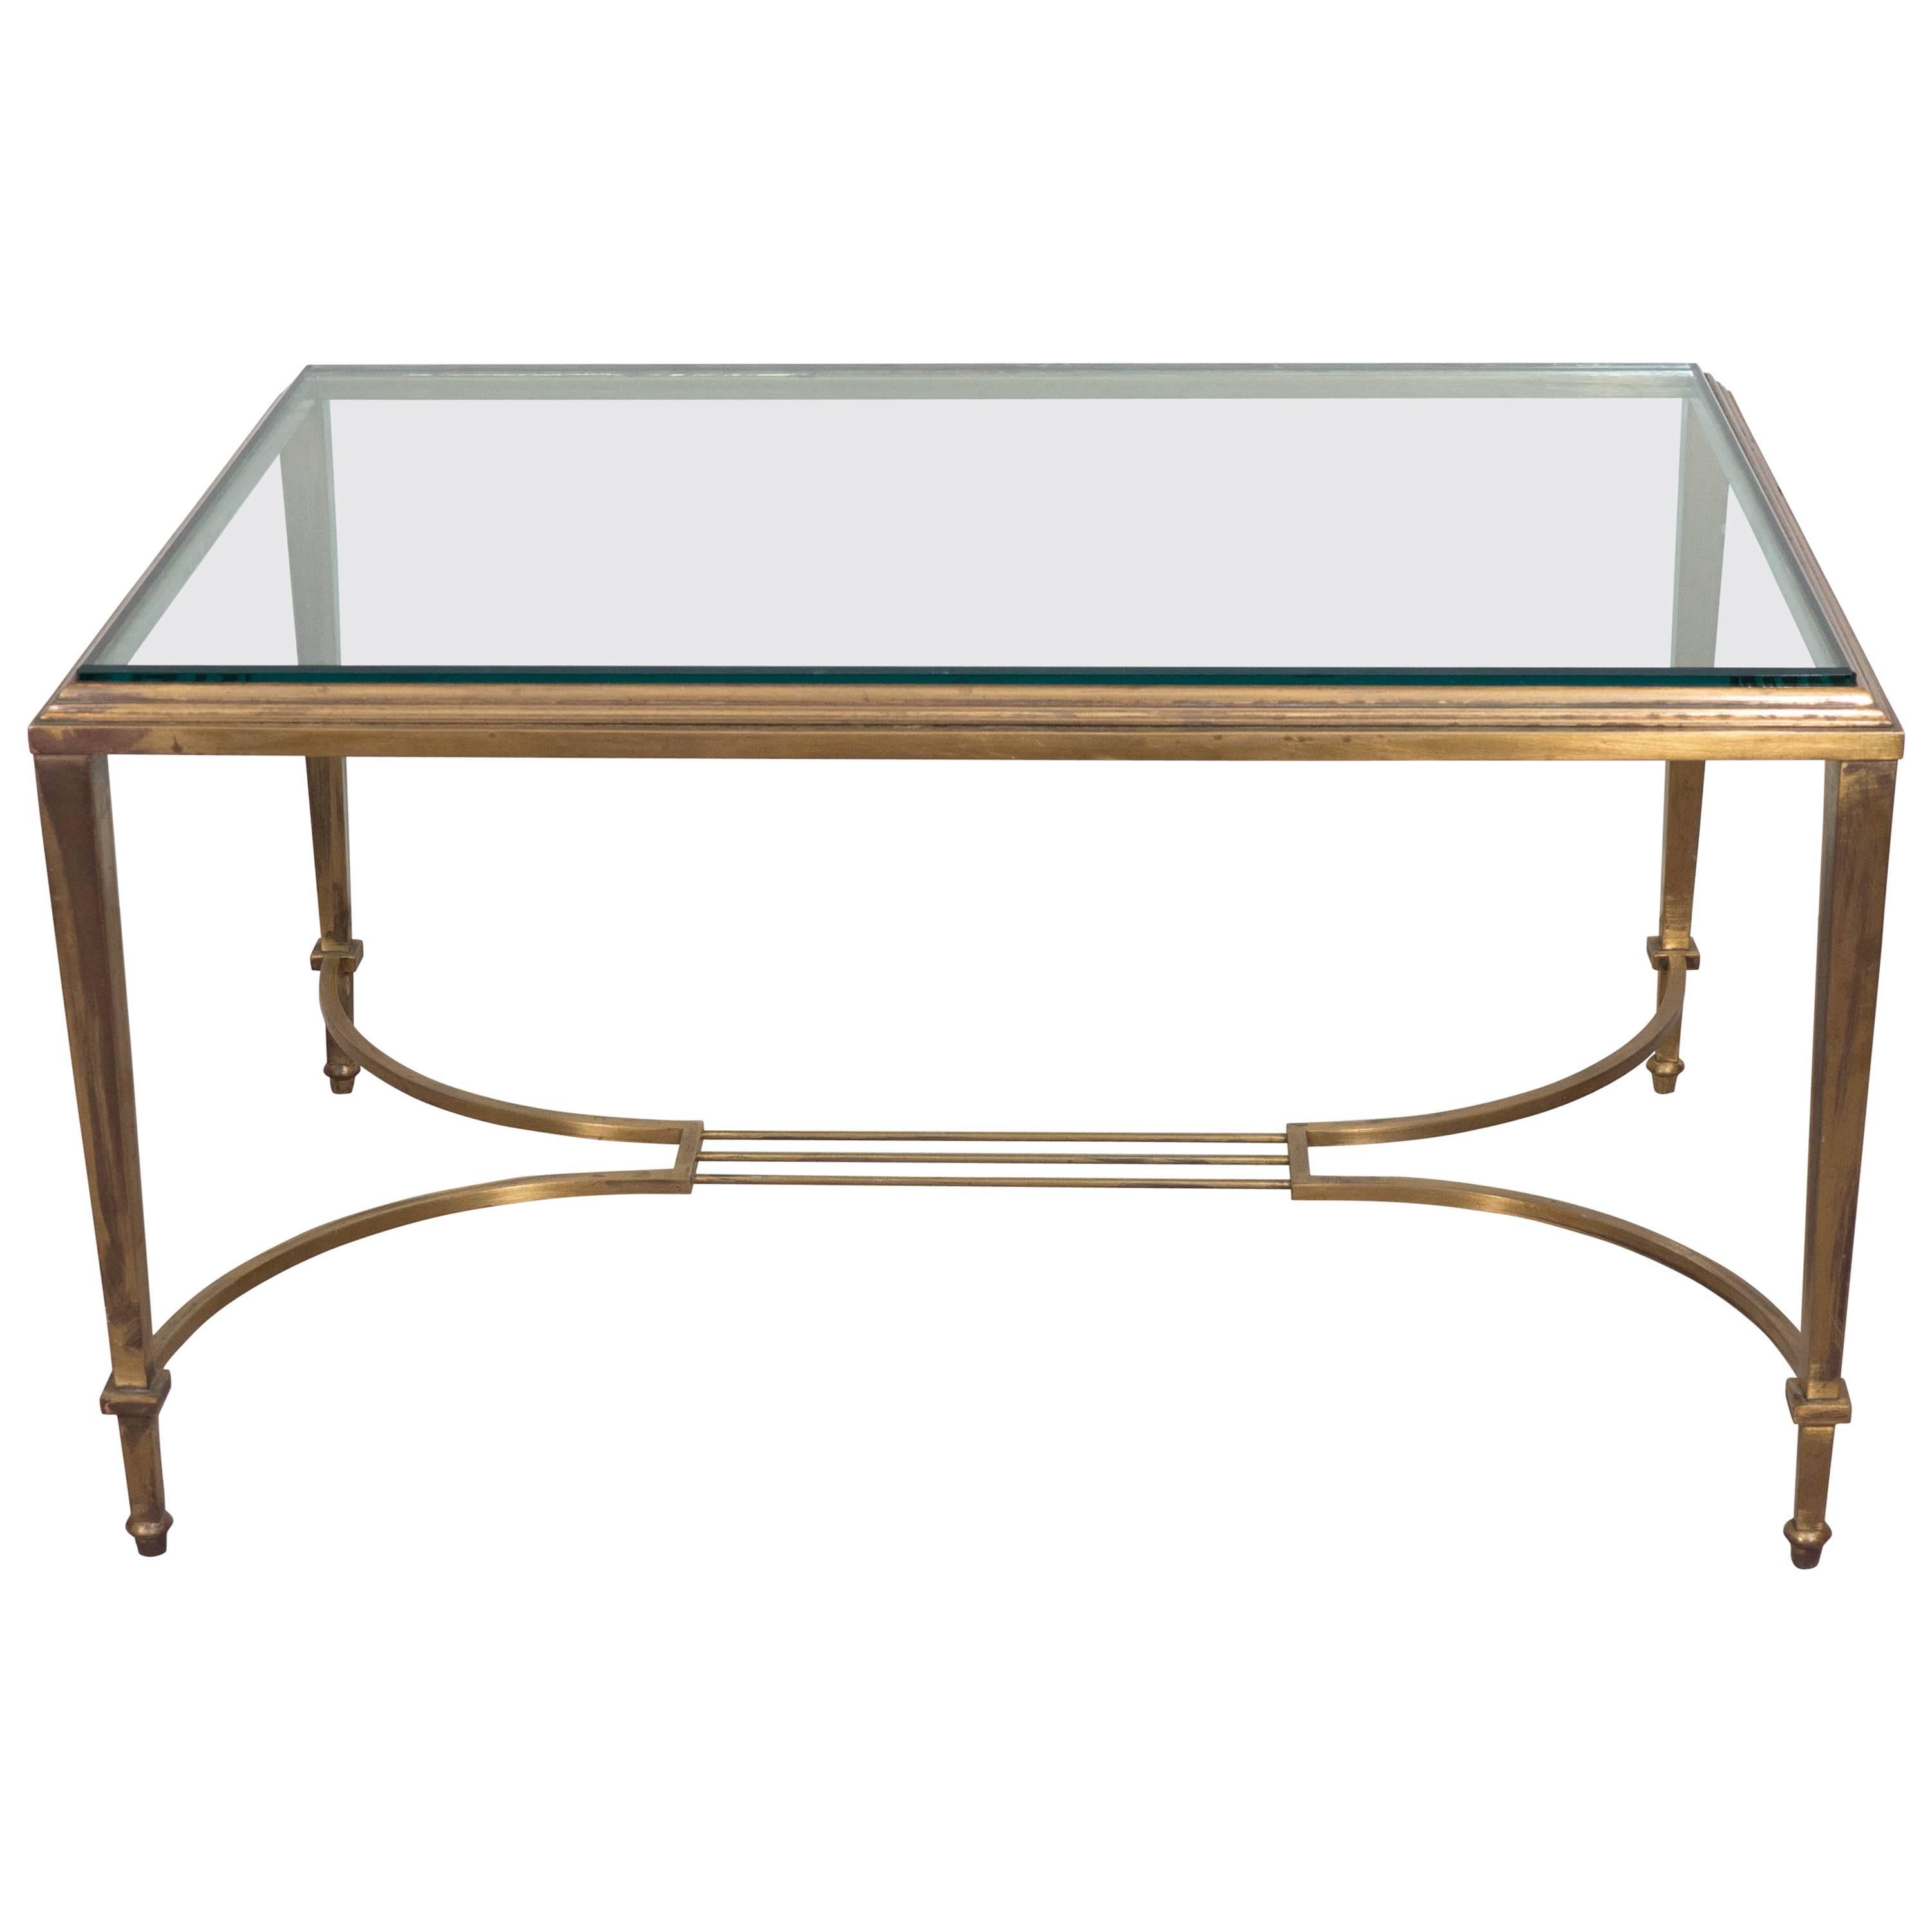 Neoclassical Style Glass Top Coffee Table in Brass, Attributed to Maison Jansen